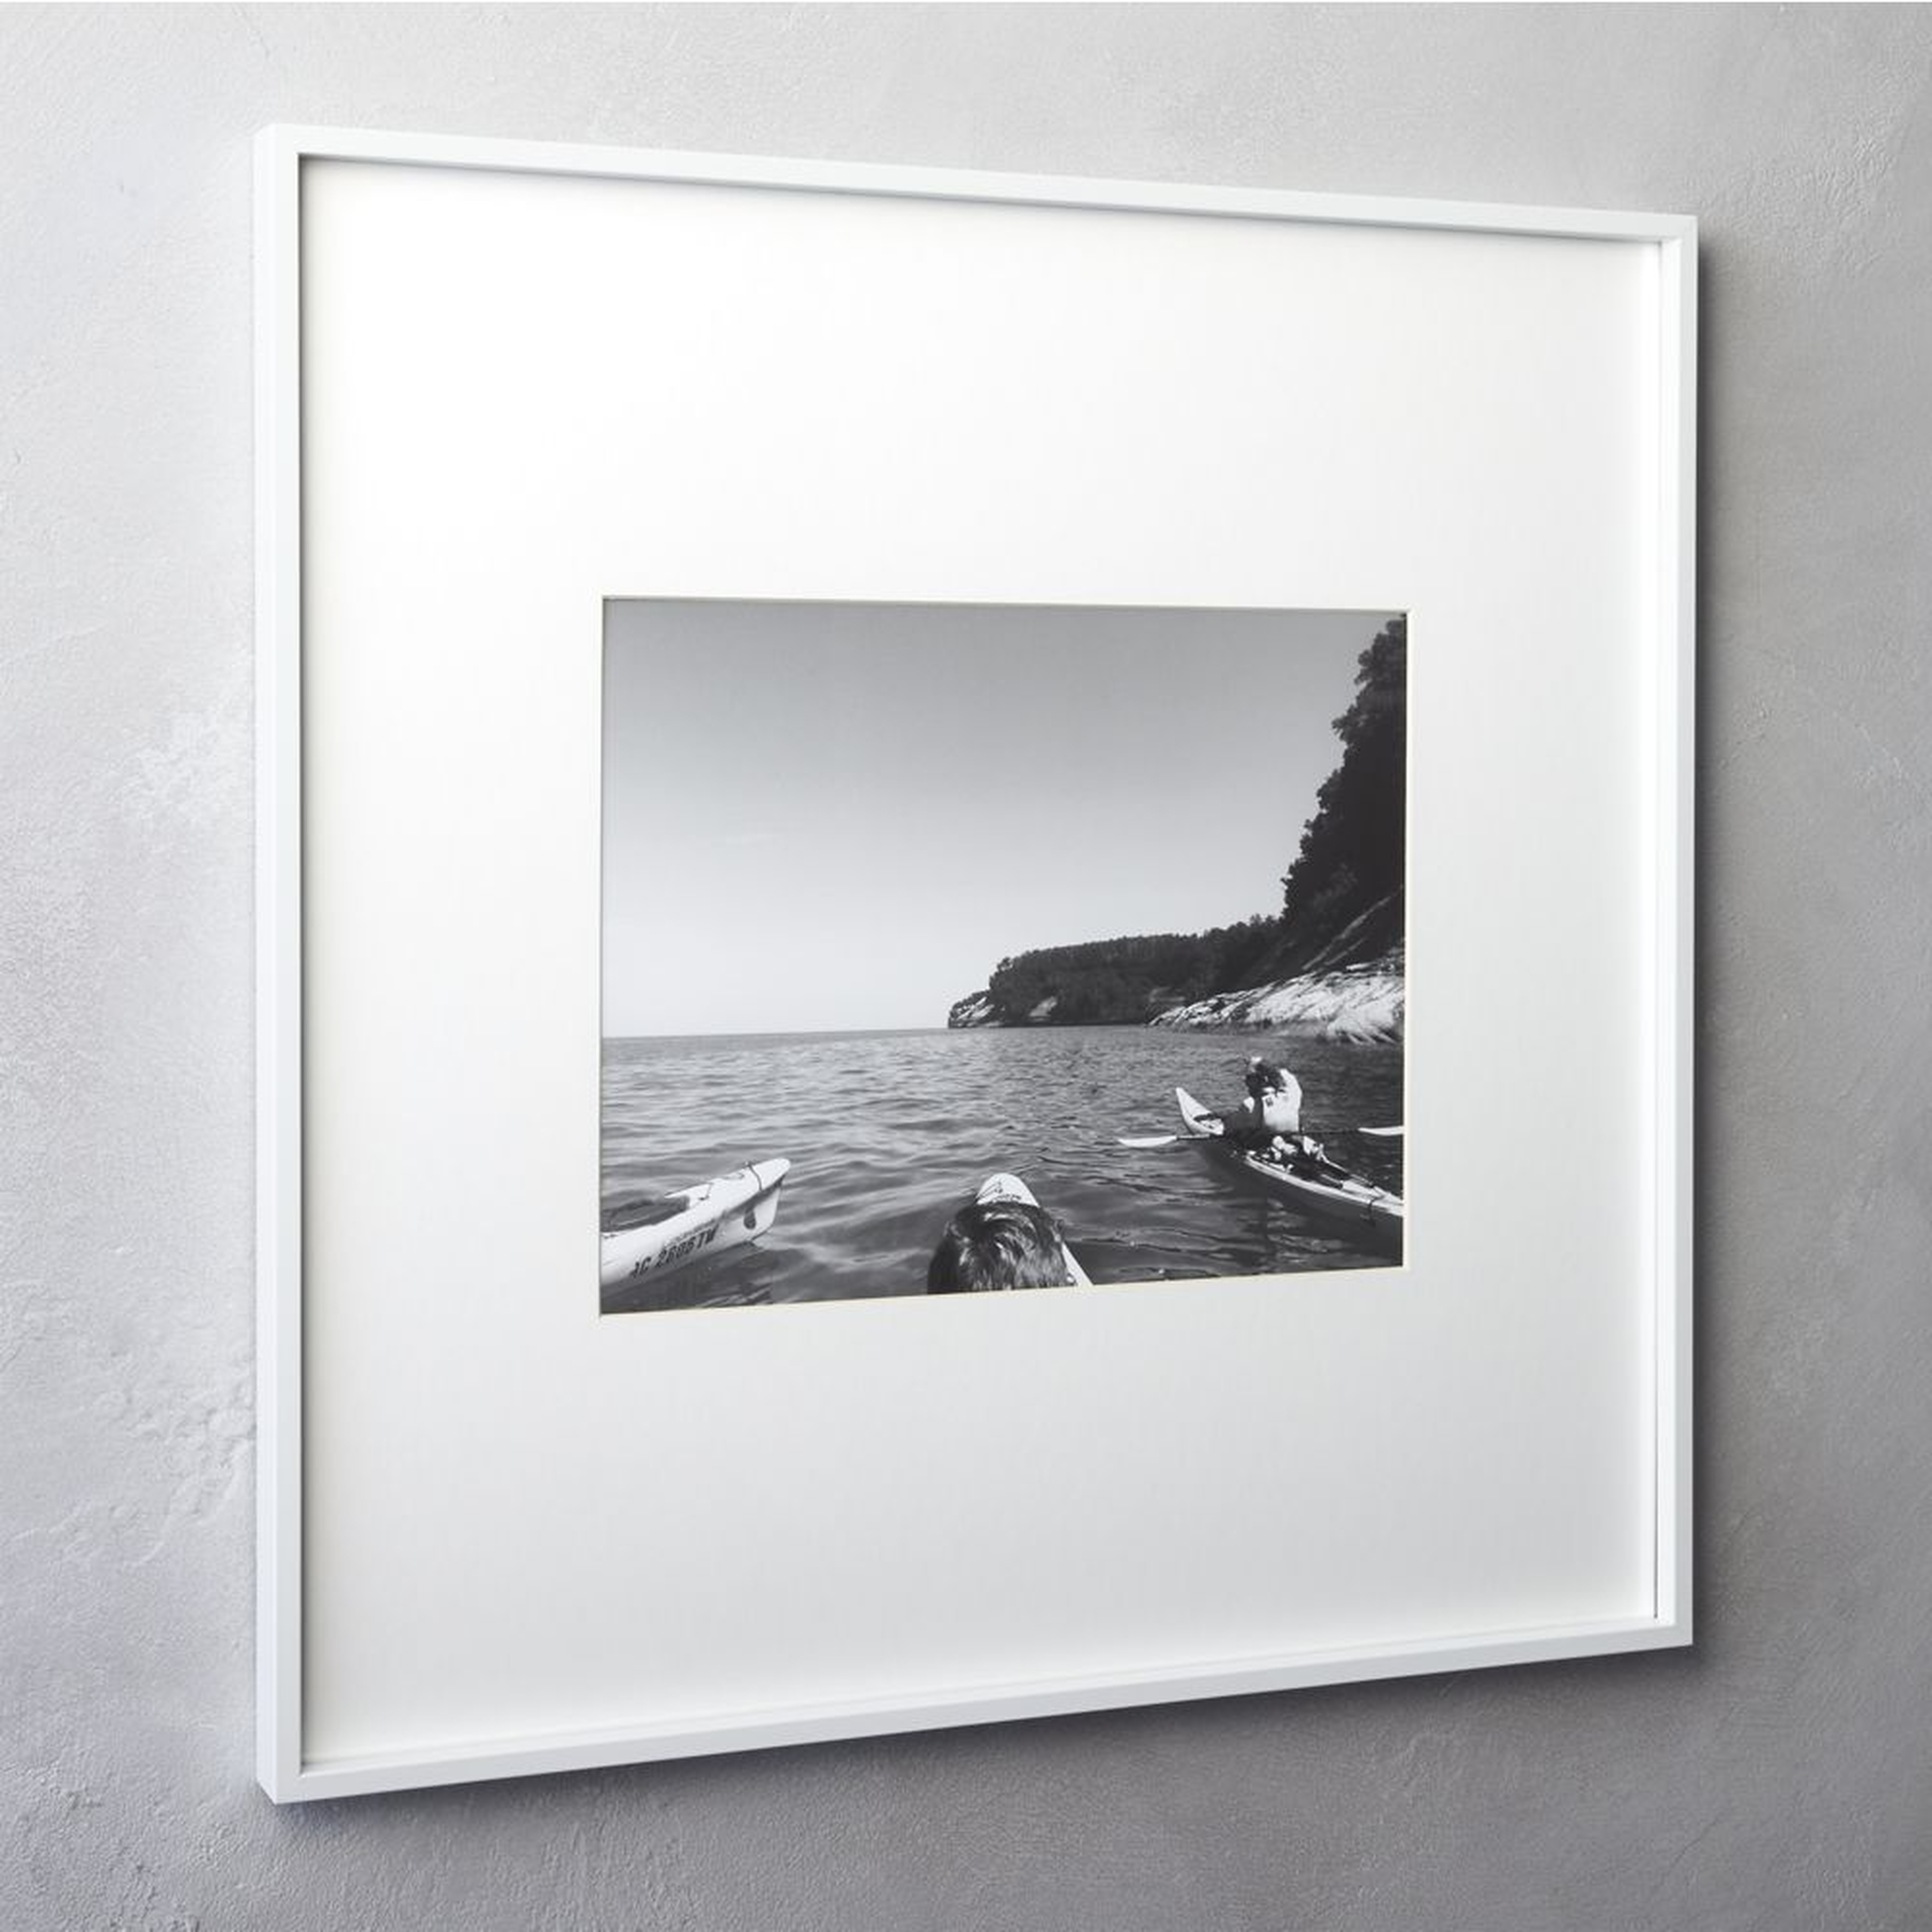 Gallery Picture Frame, White, 11" x 14" - CB2